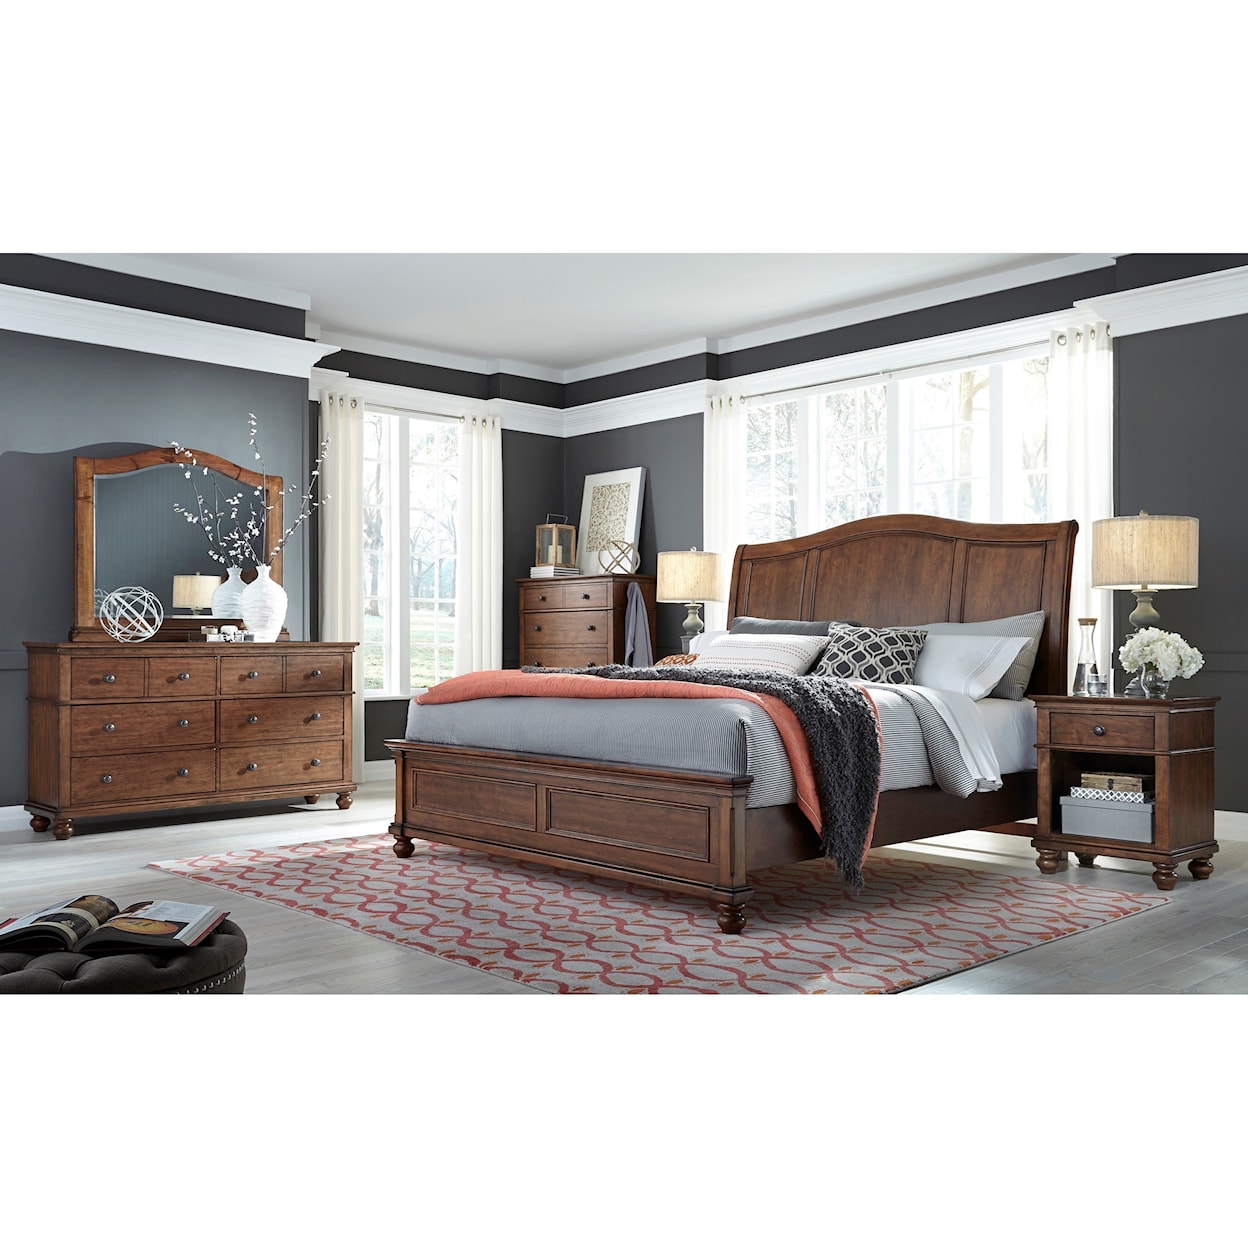 Aspenhome Oxford 5 Piece King Bedroom Group